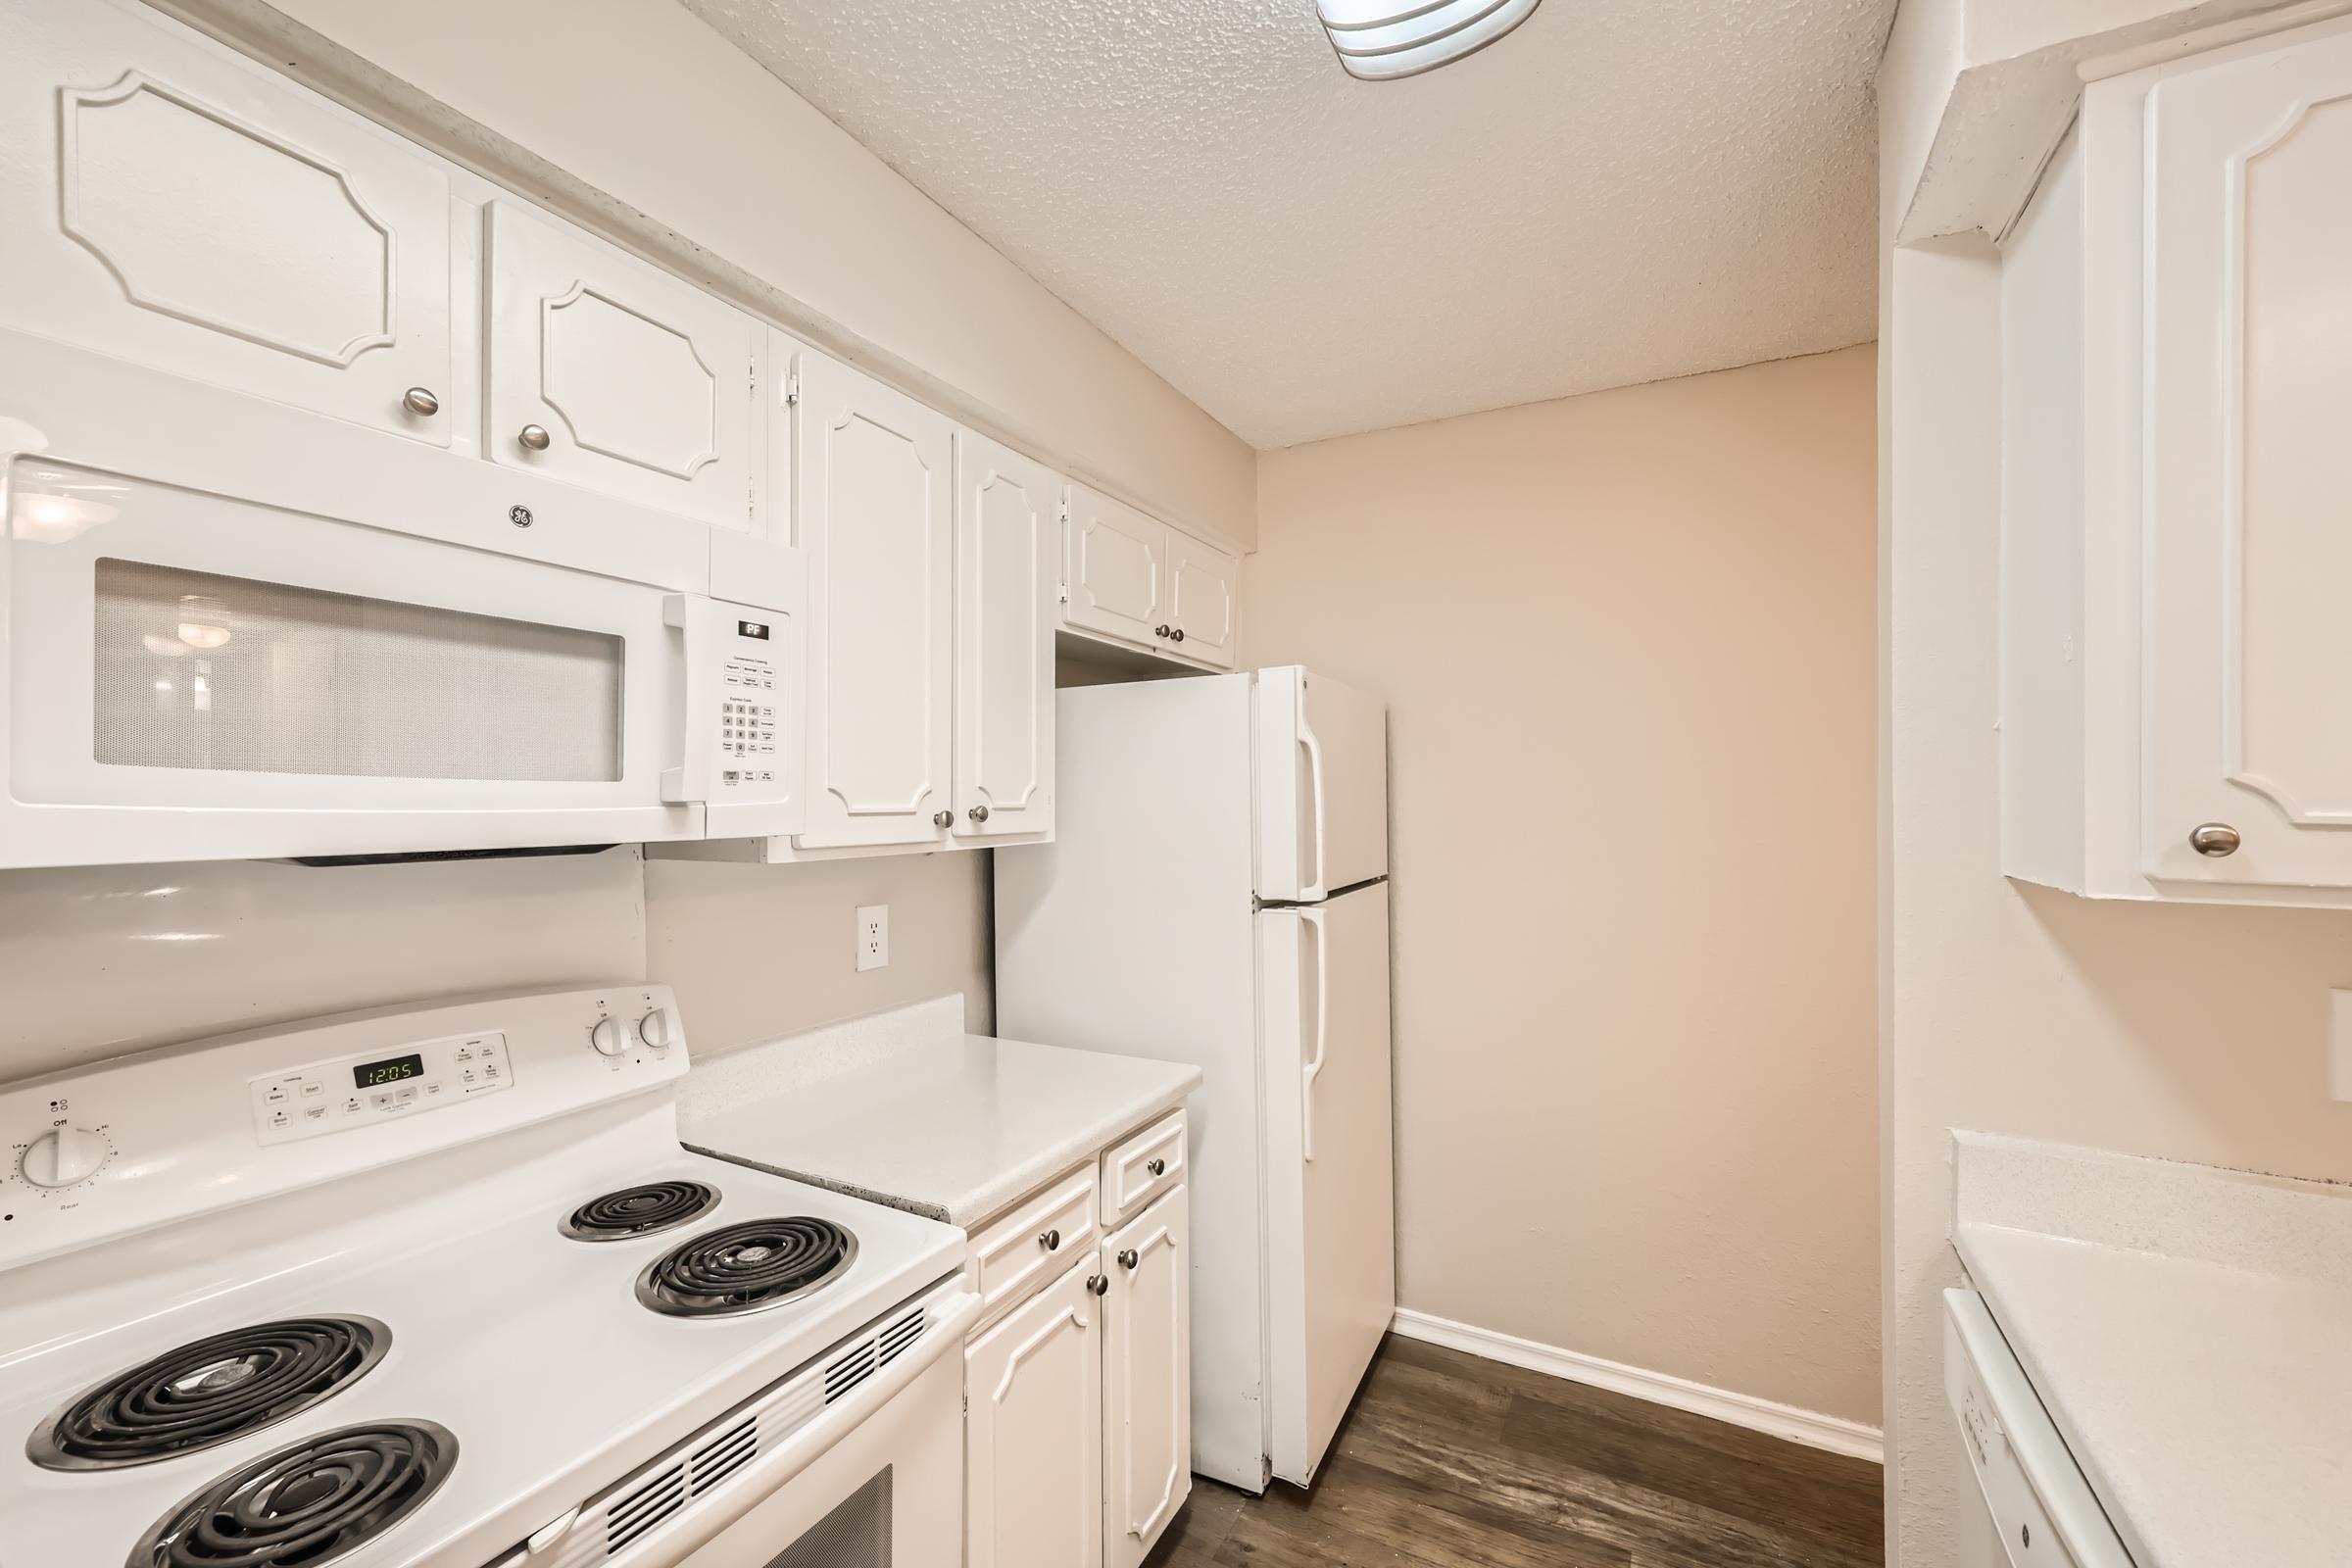 A kitchen with white cupboards and white appliances at Rise Oak Creek.